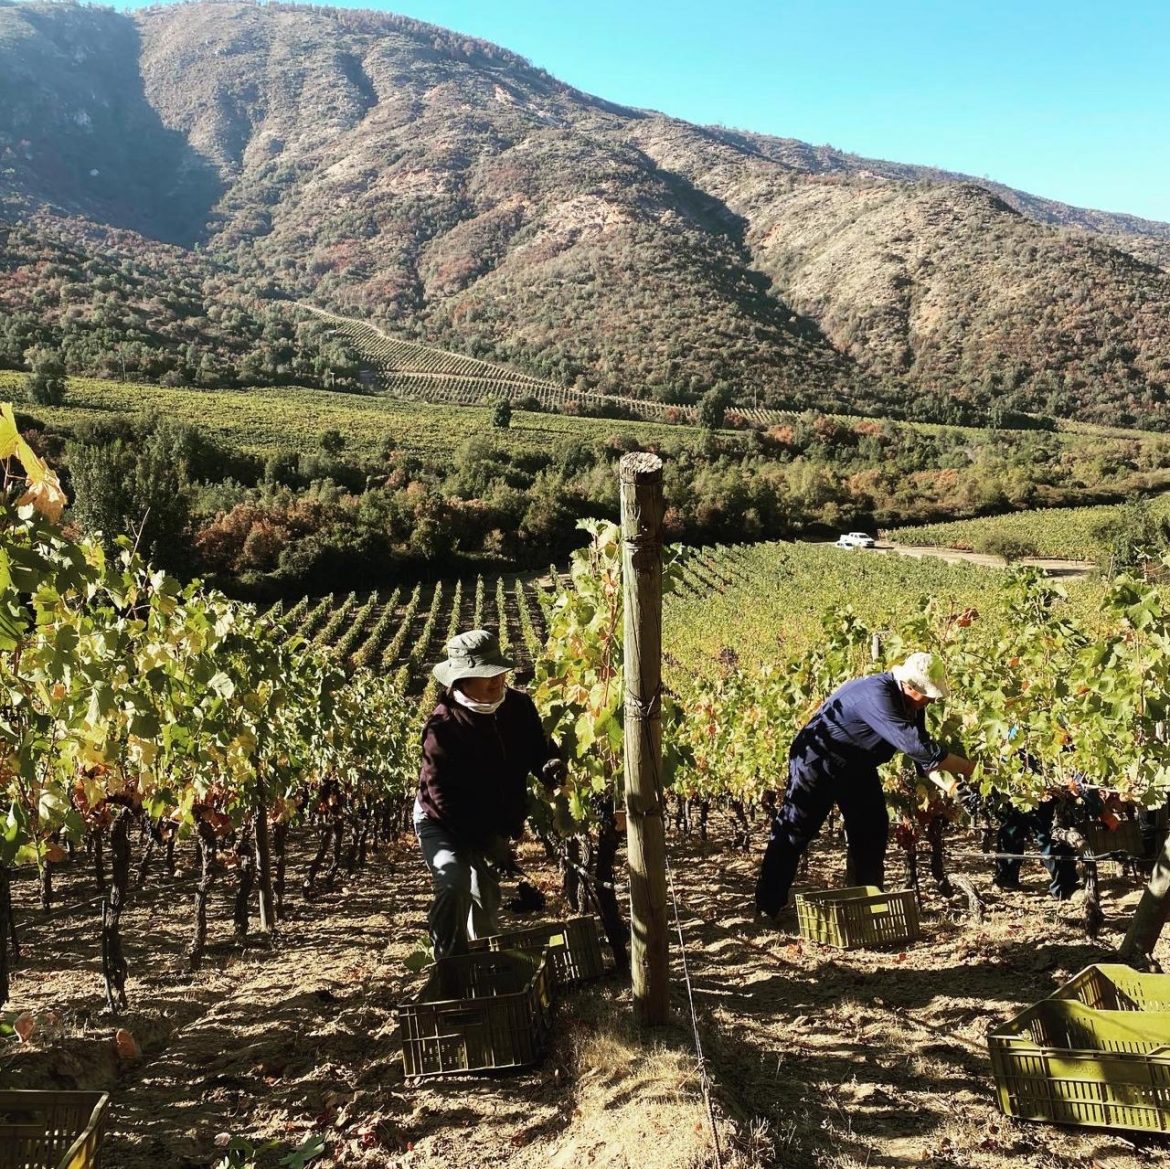 Guide to vintage 2020 in Chile